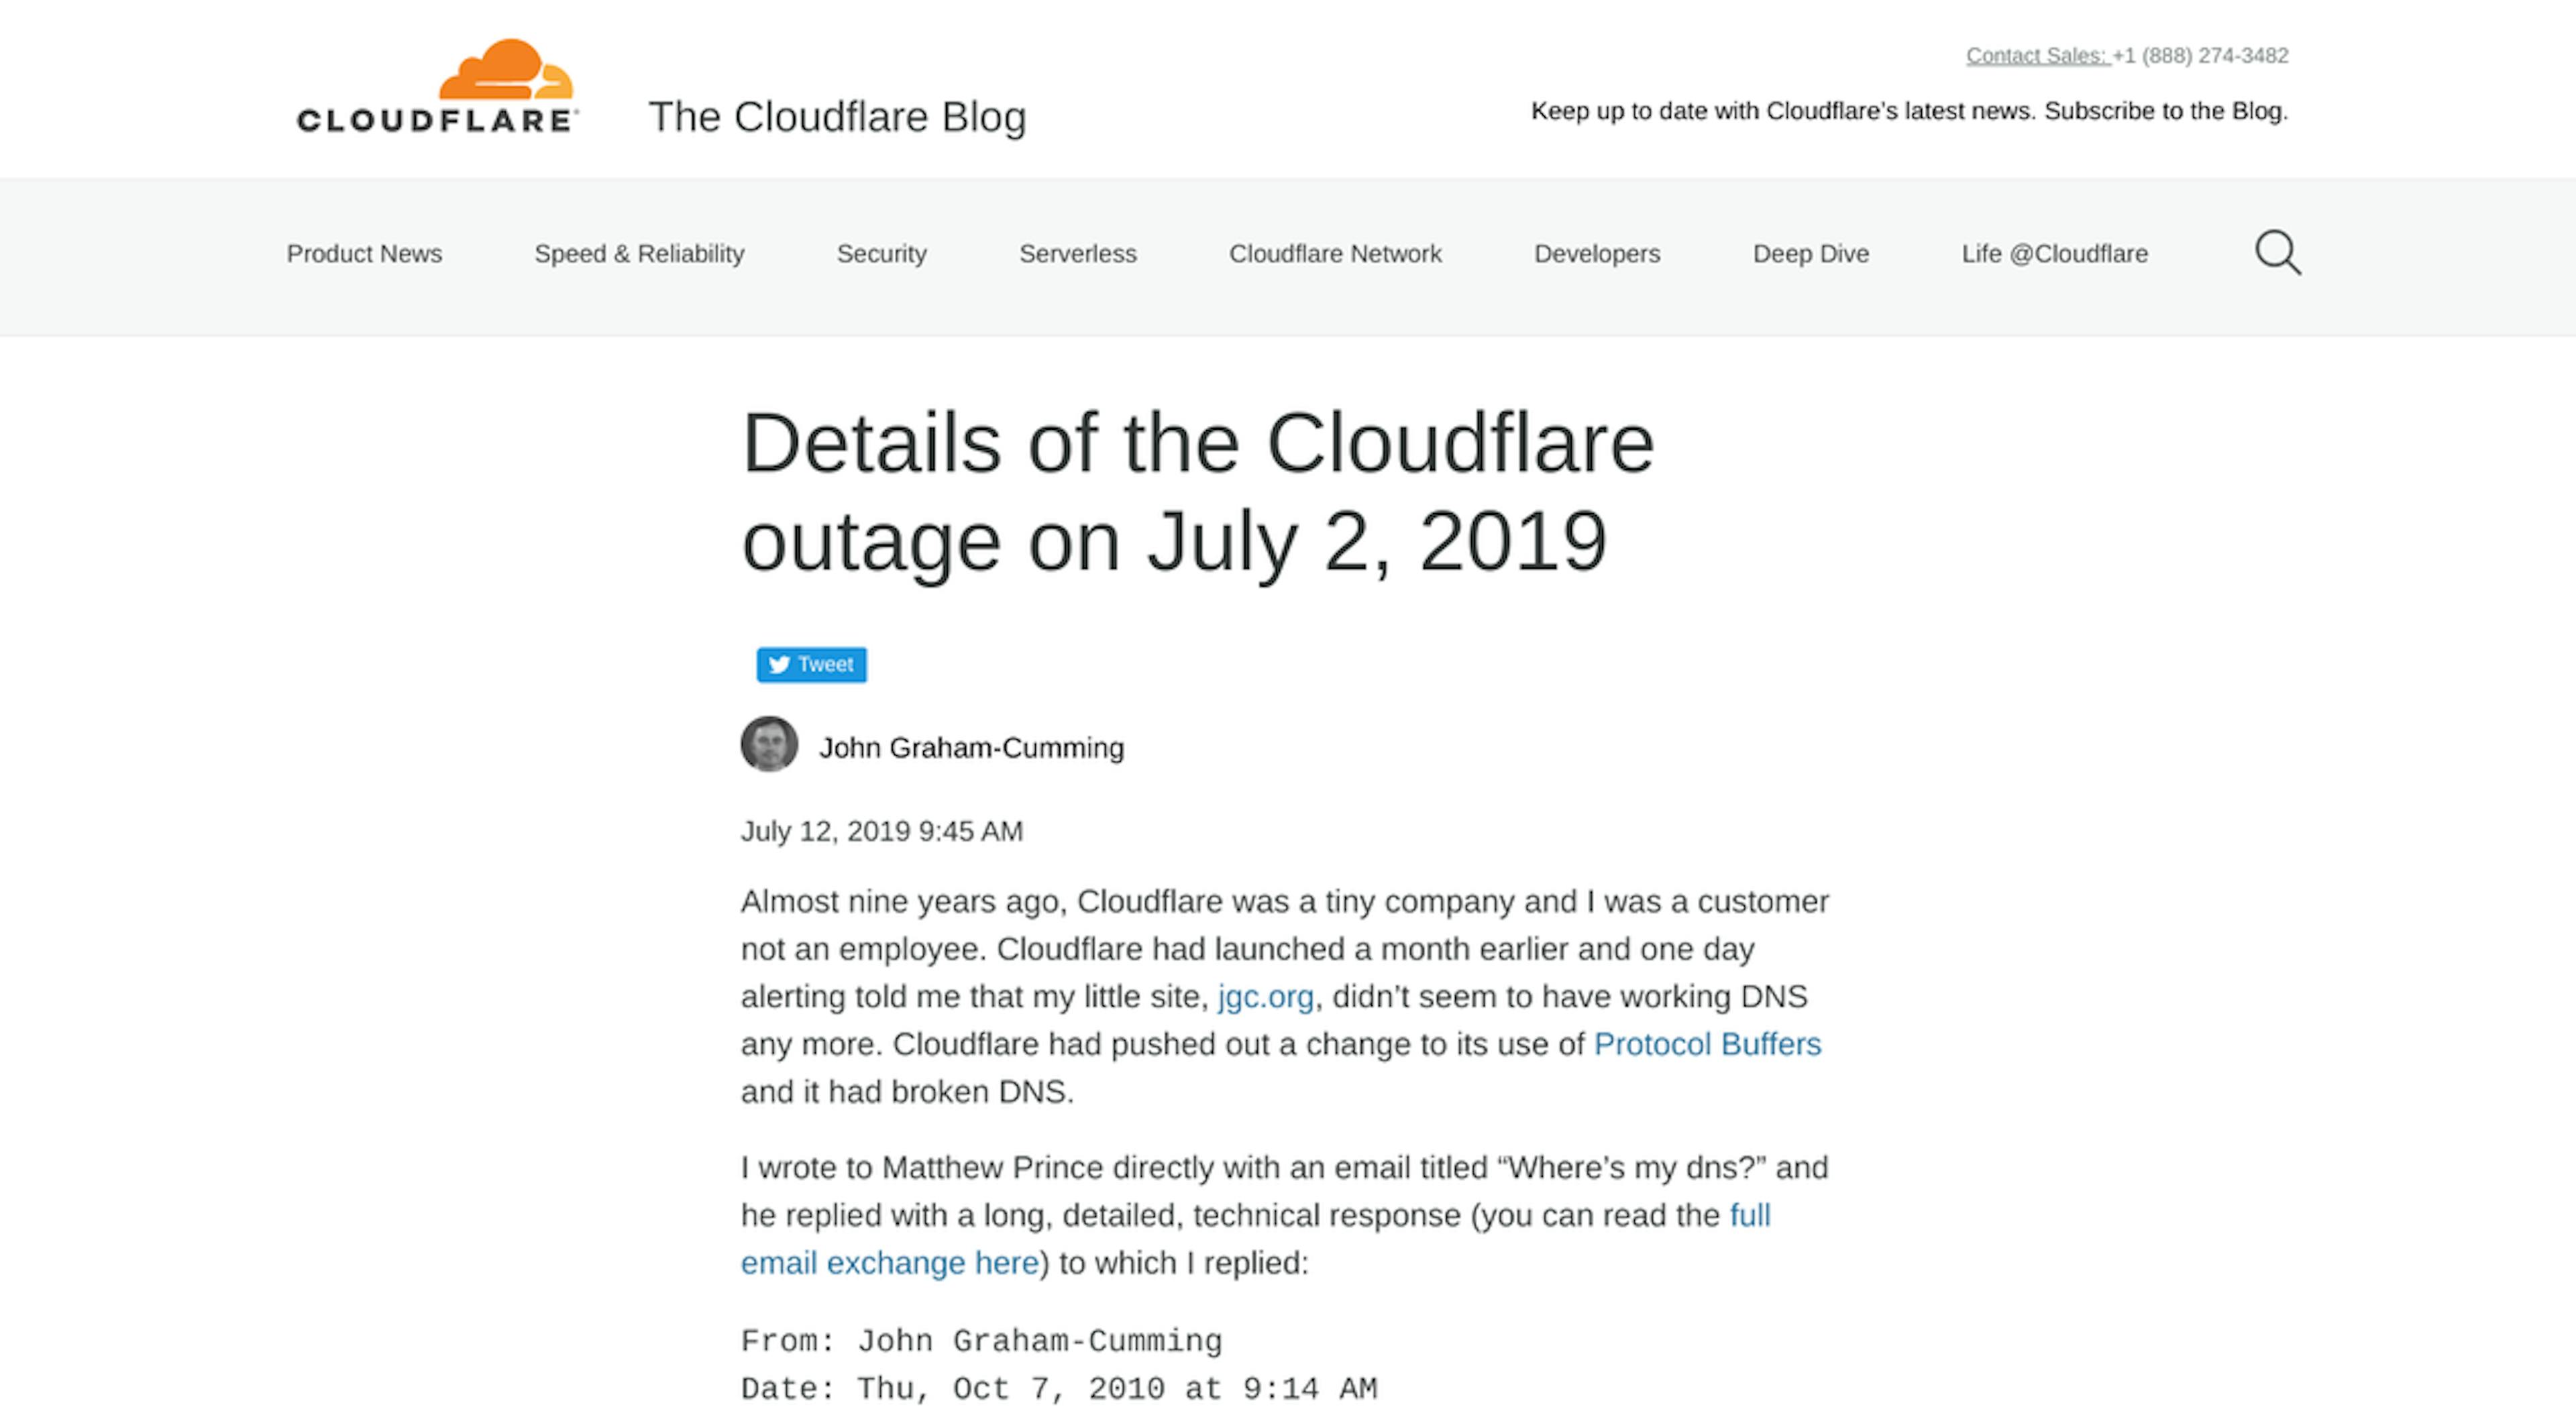 Details of the Cloudflare outage on July 2, 2019